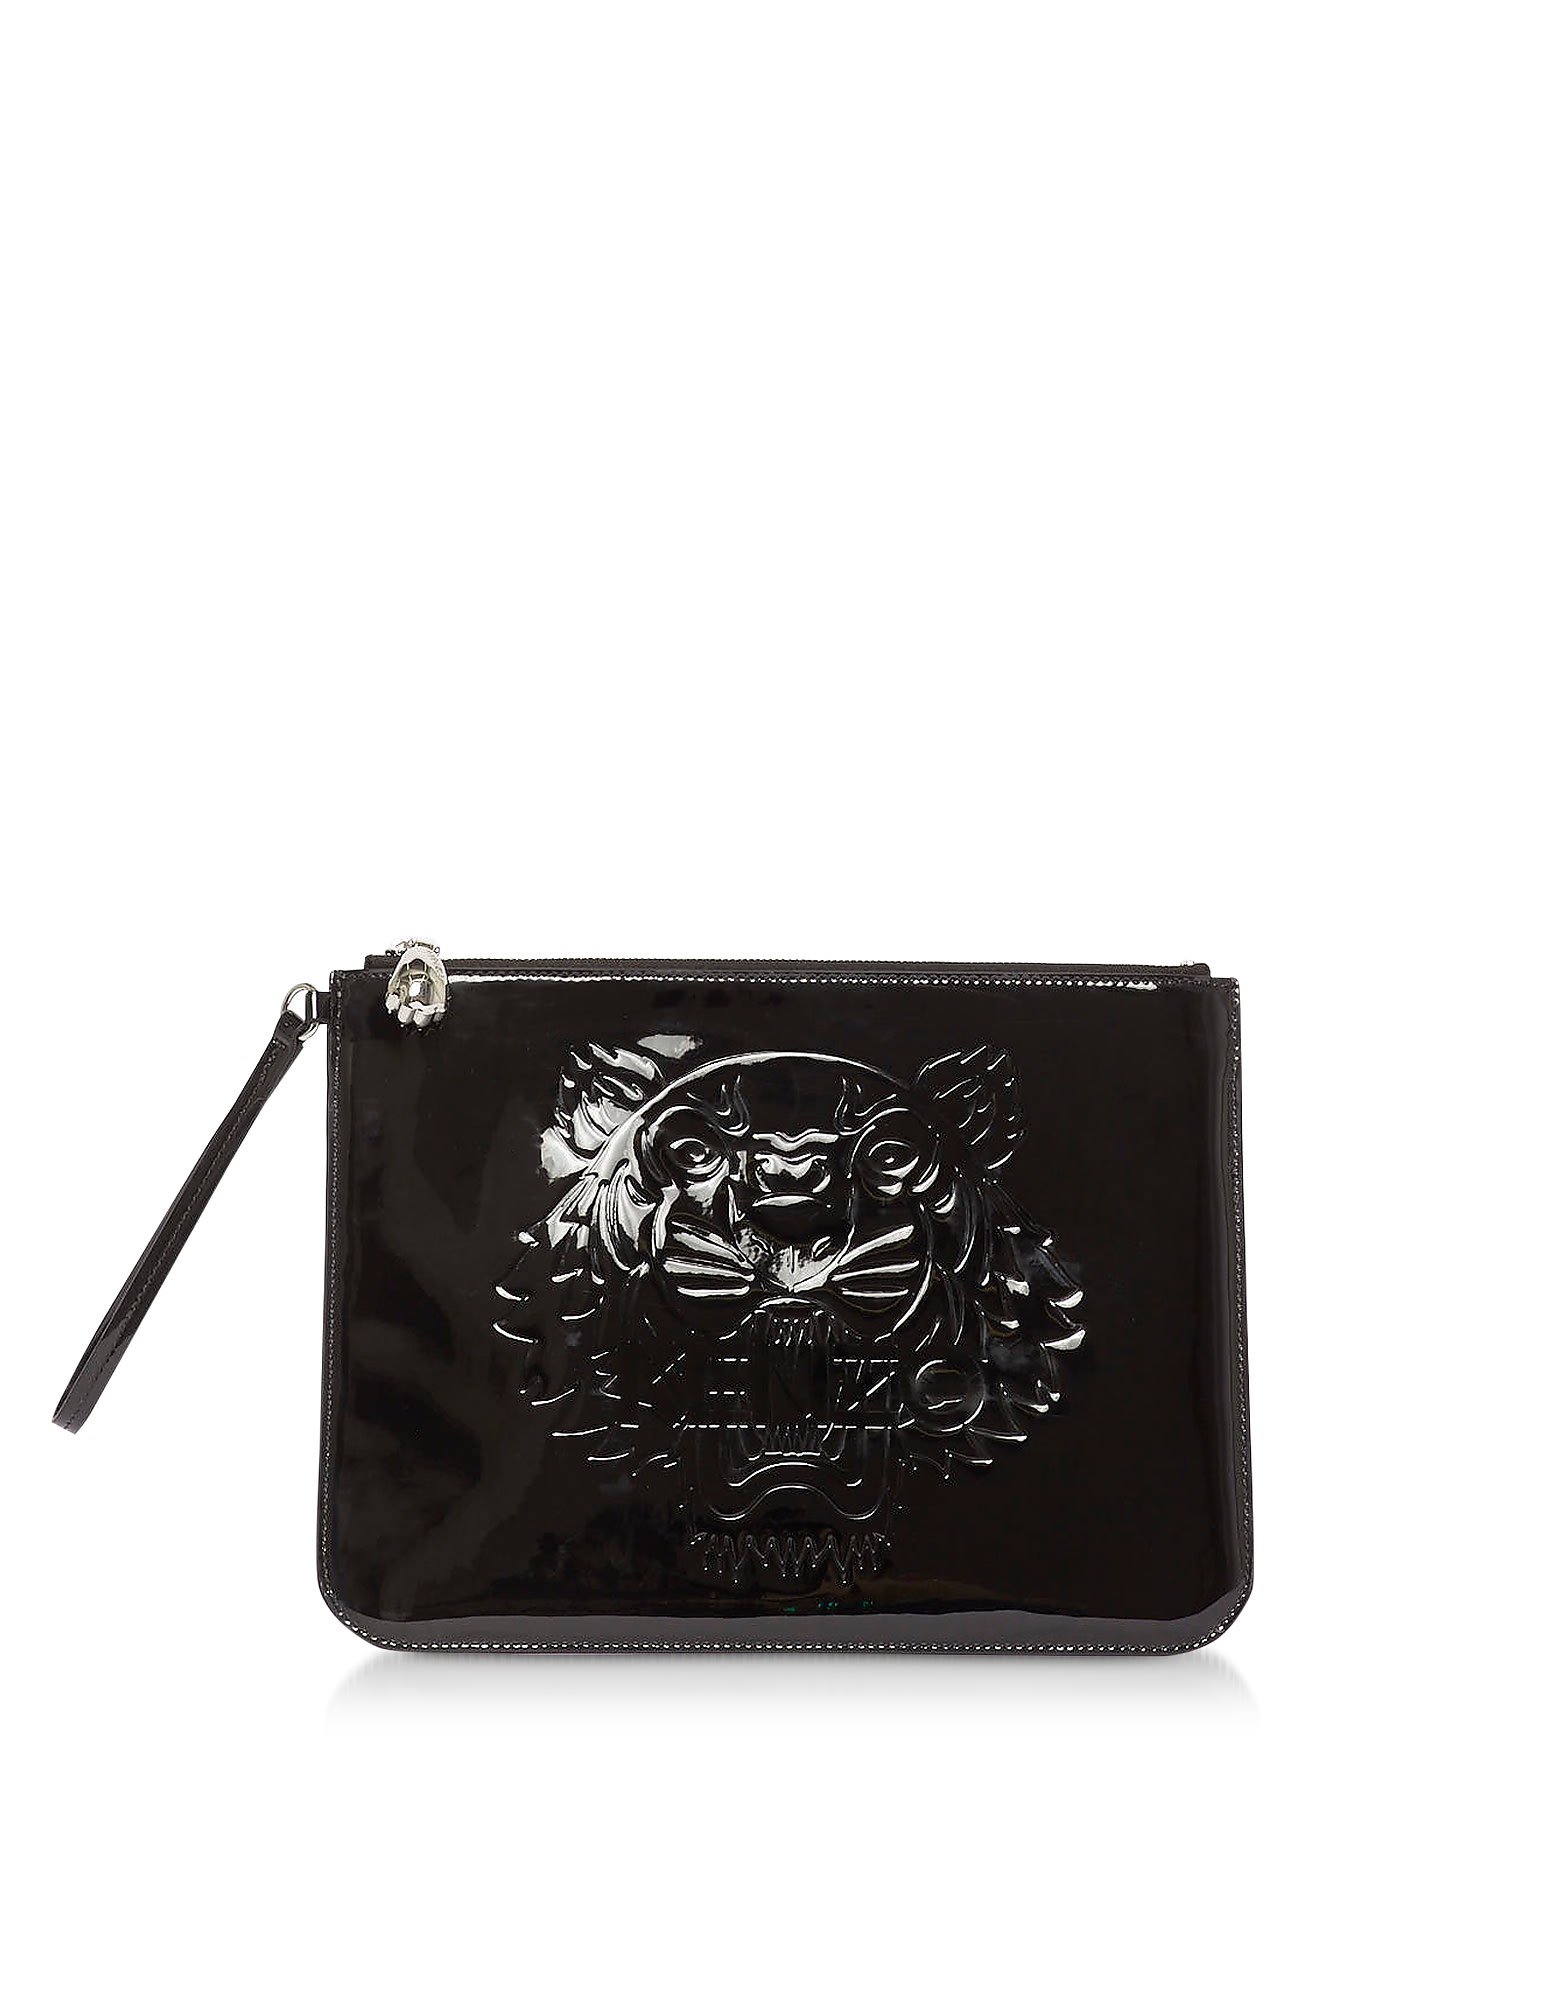 KENZO BLACK PREPPY TIGER EMBOSSED ECO-LEATHER CLUTCH,11234668